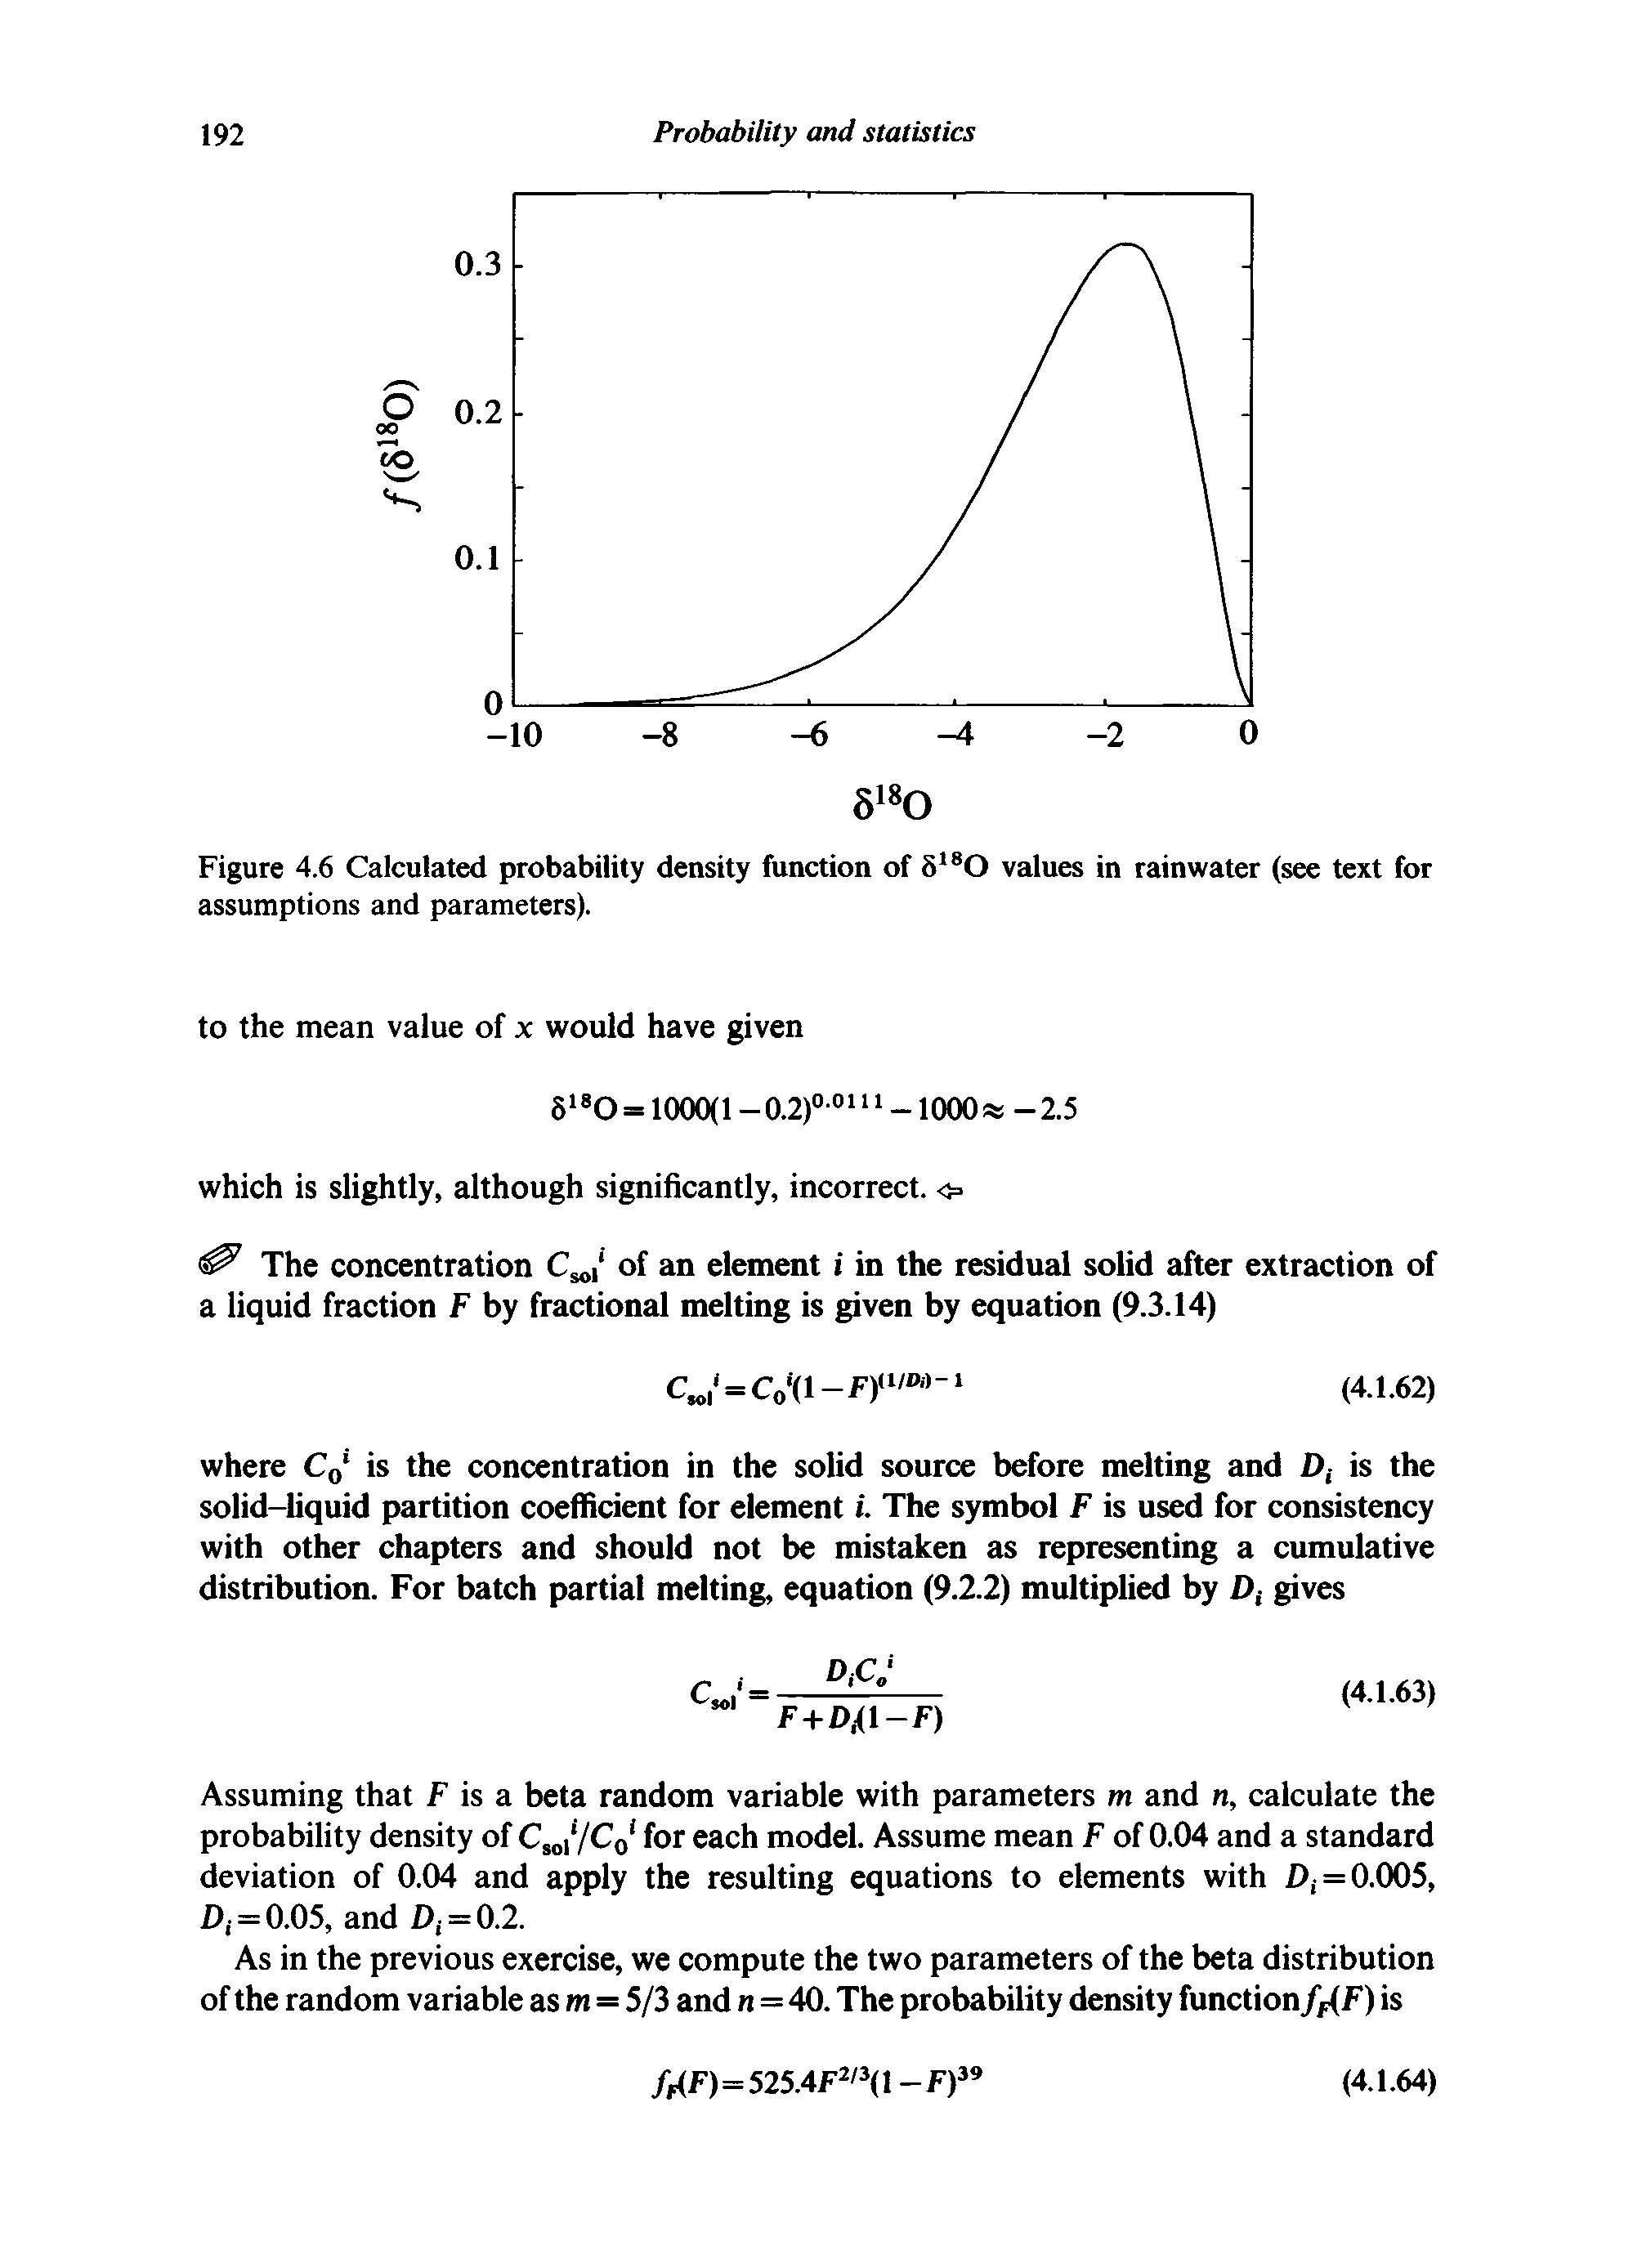 Figure 4.6 Calculated probability density function of 5lsO values in rainwater (see text for assumptions and parameters).